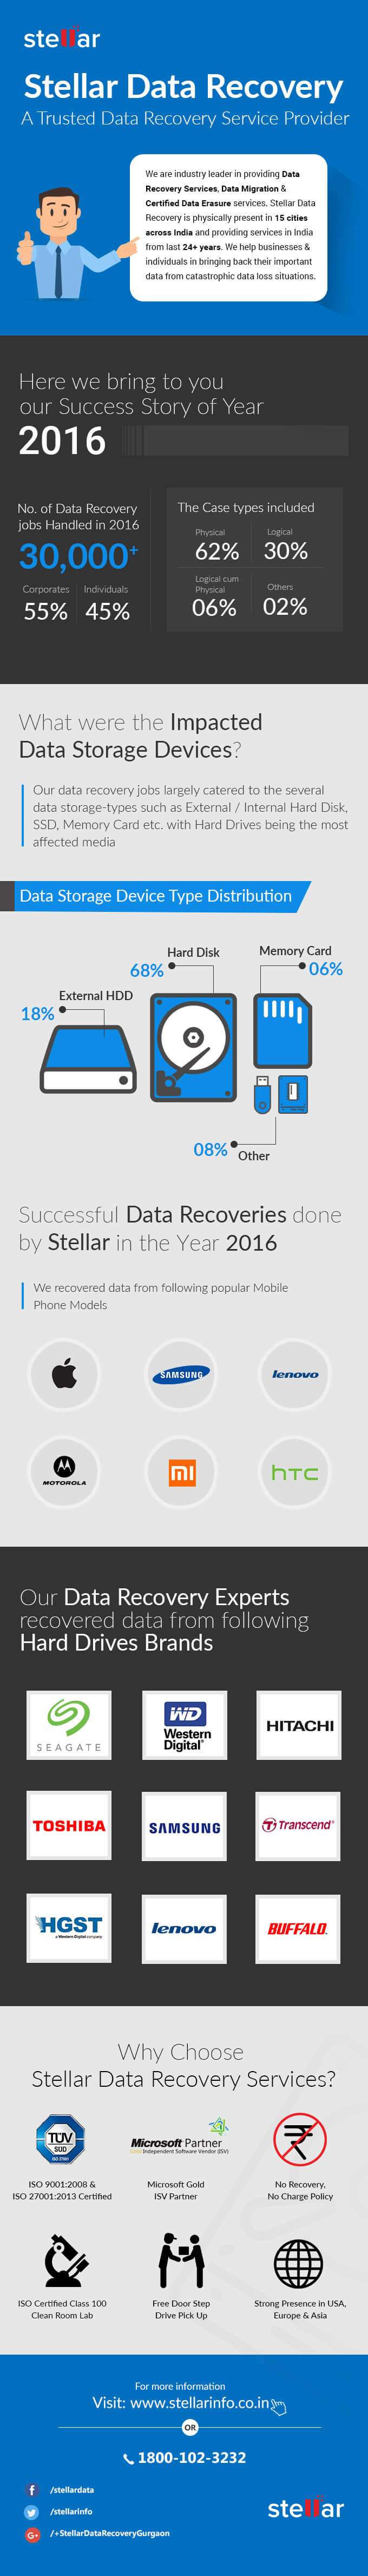 Successful Data Recovery by Stellar